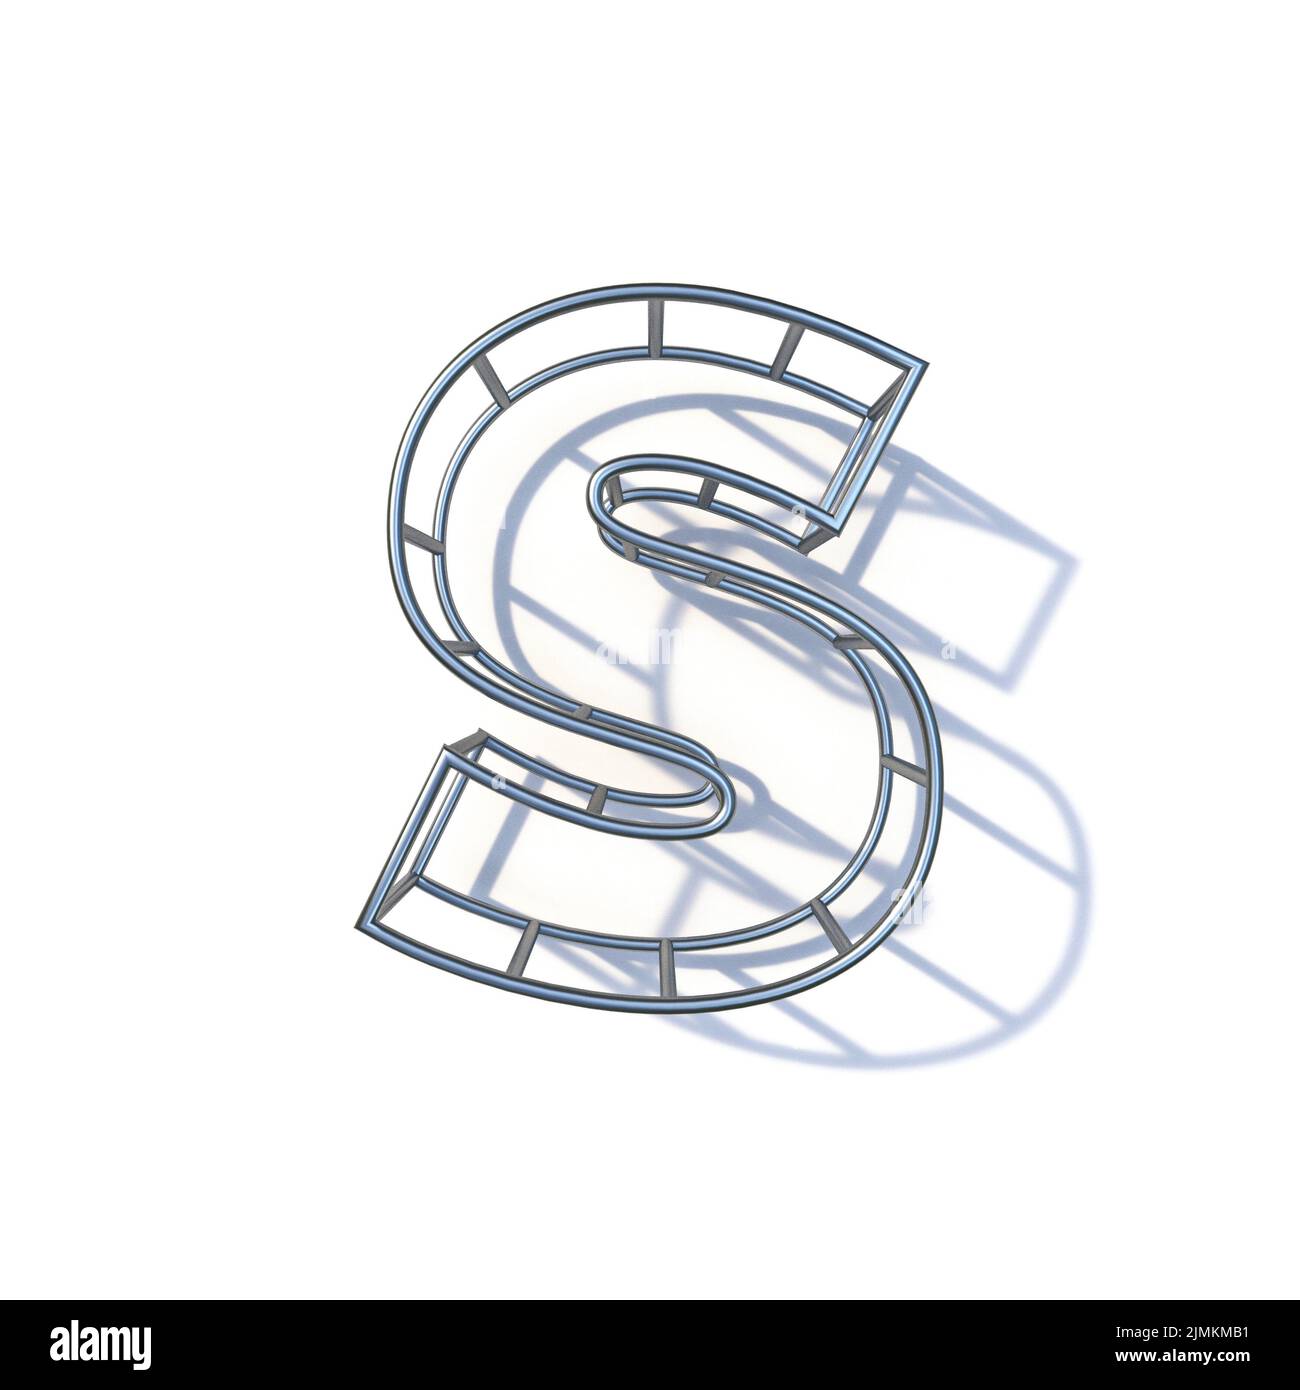 Steel wire frame font Letter S 3D Stock Photo